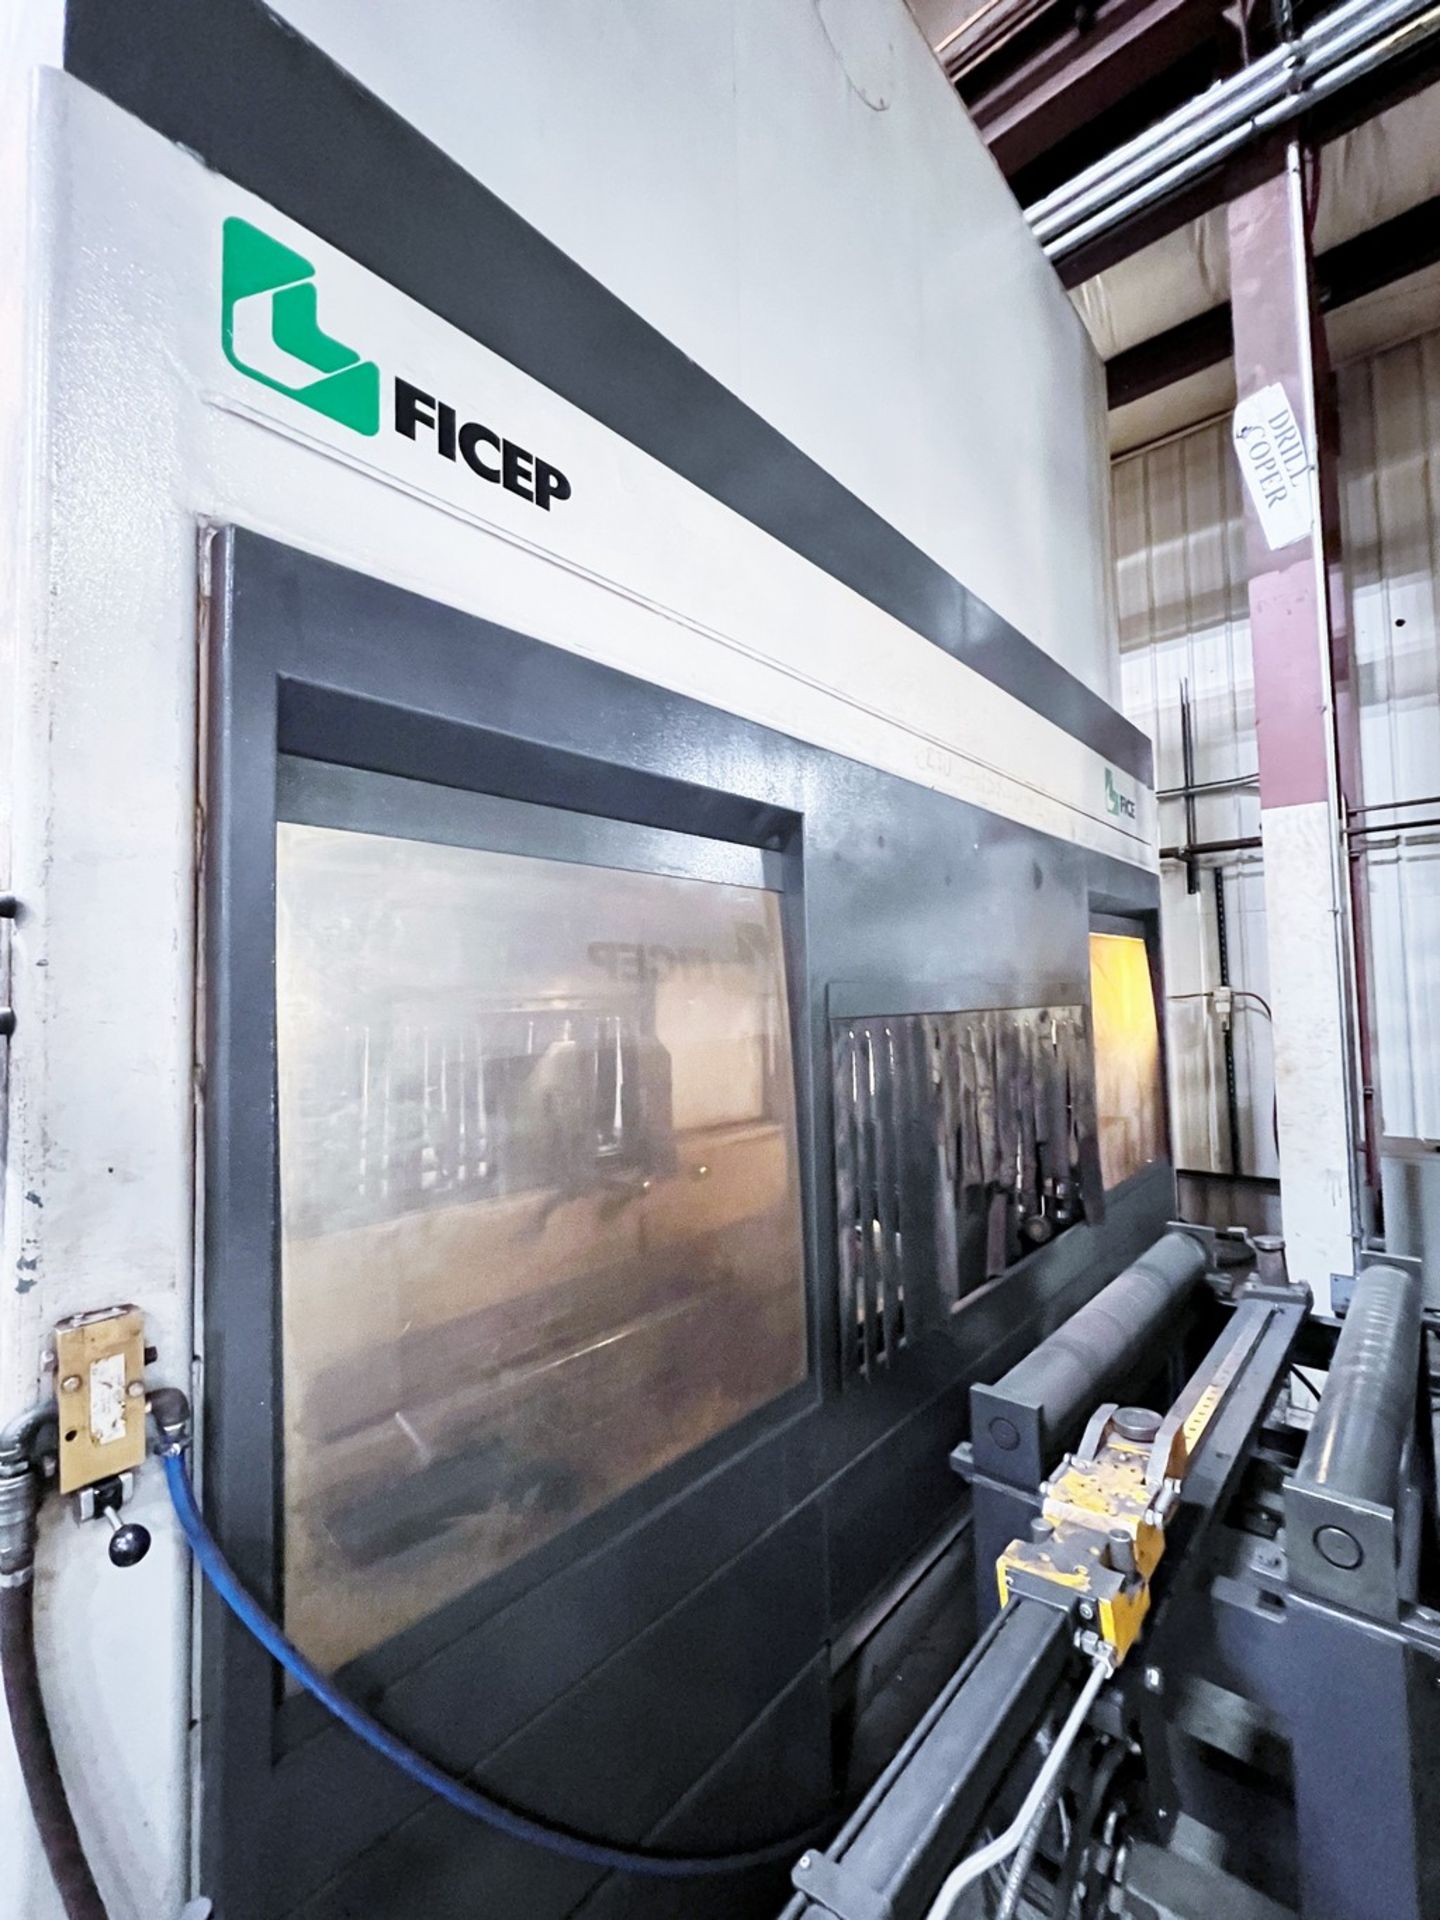 Ficep 1204 DDRC CNC (3) Spindle Drilling & Thermal Cutting System, New 2014 - Image 12 of 23